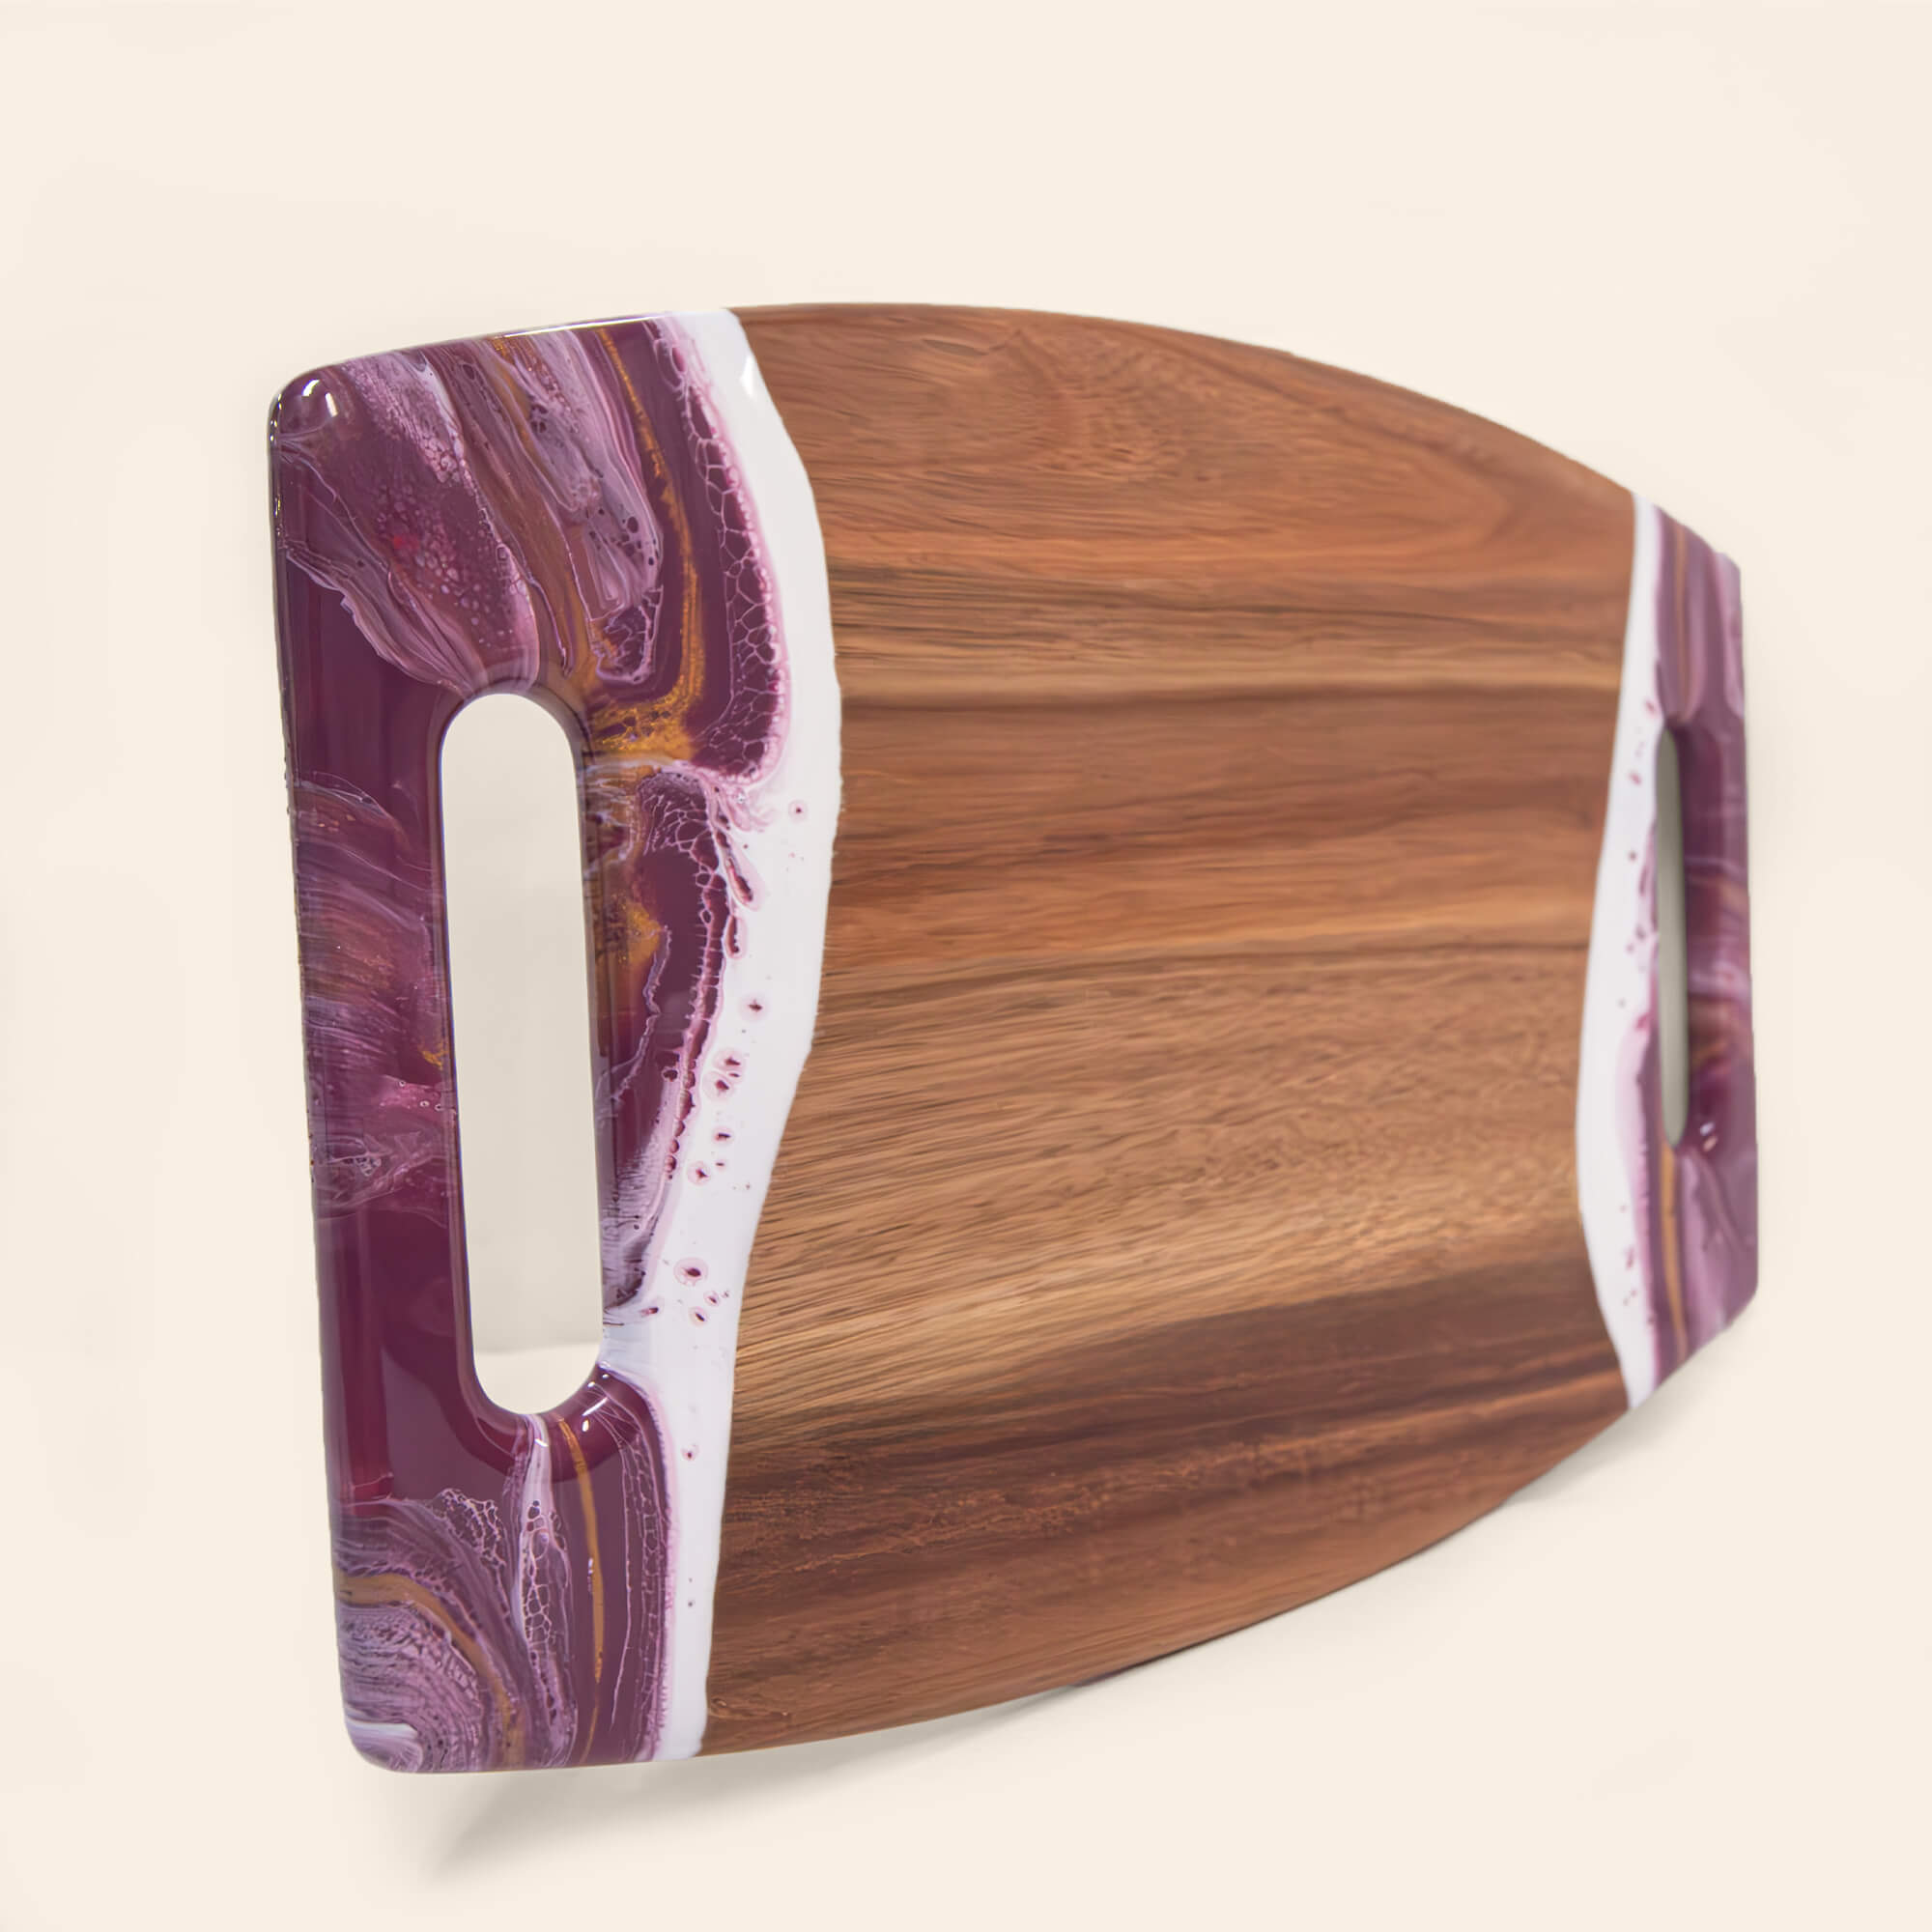 XL Curved Acacia Board With 2 Handles